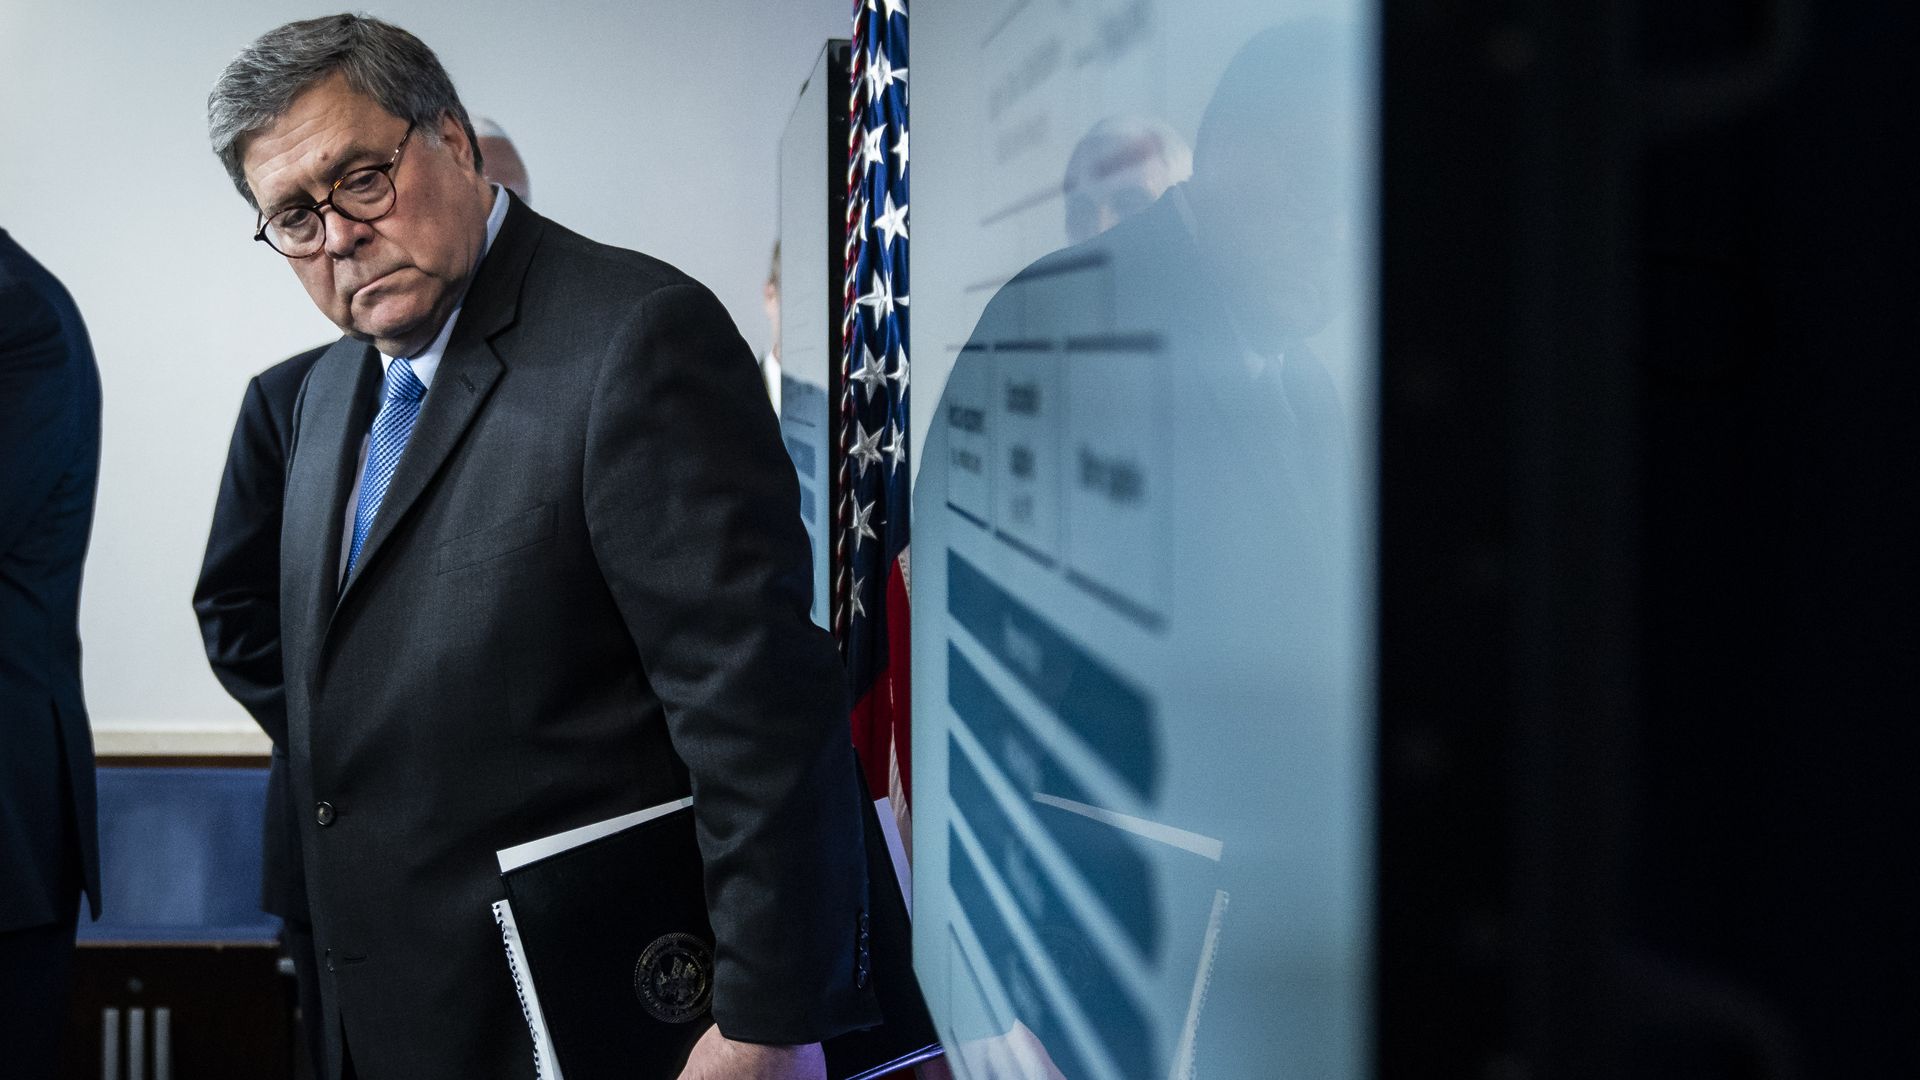 In this image, Barr holds a folder while looking at a TV screen